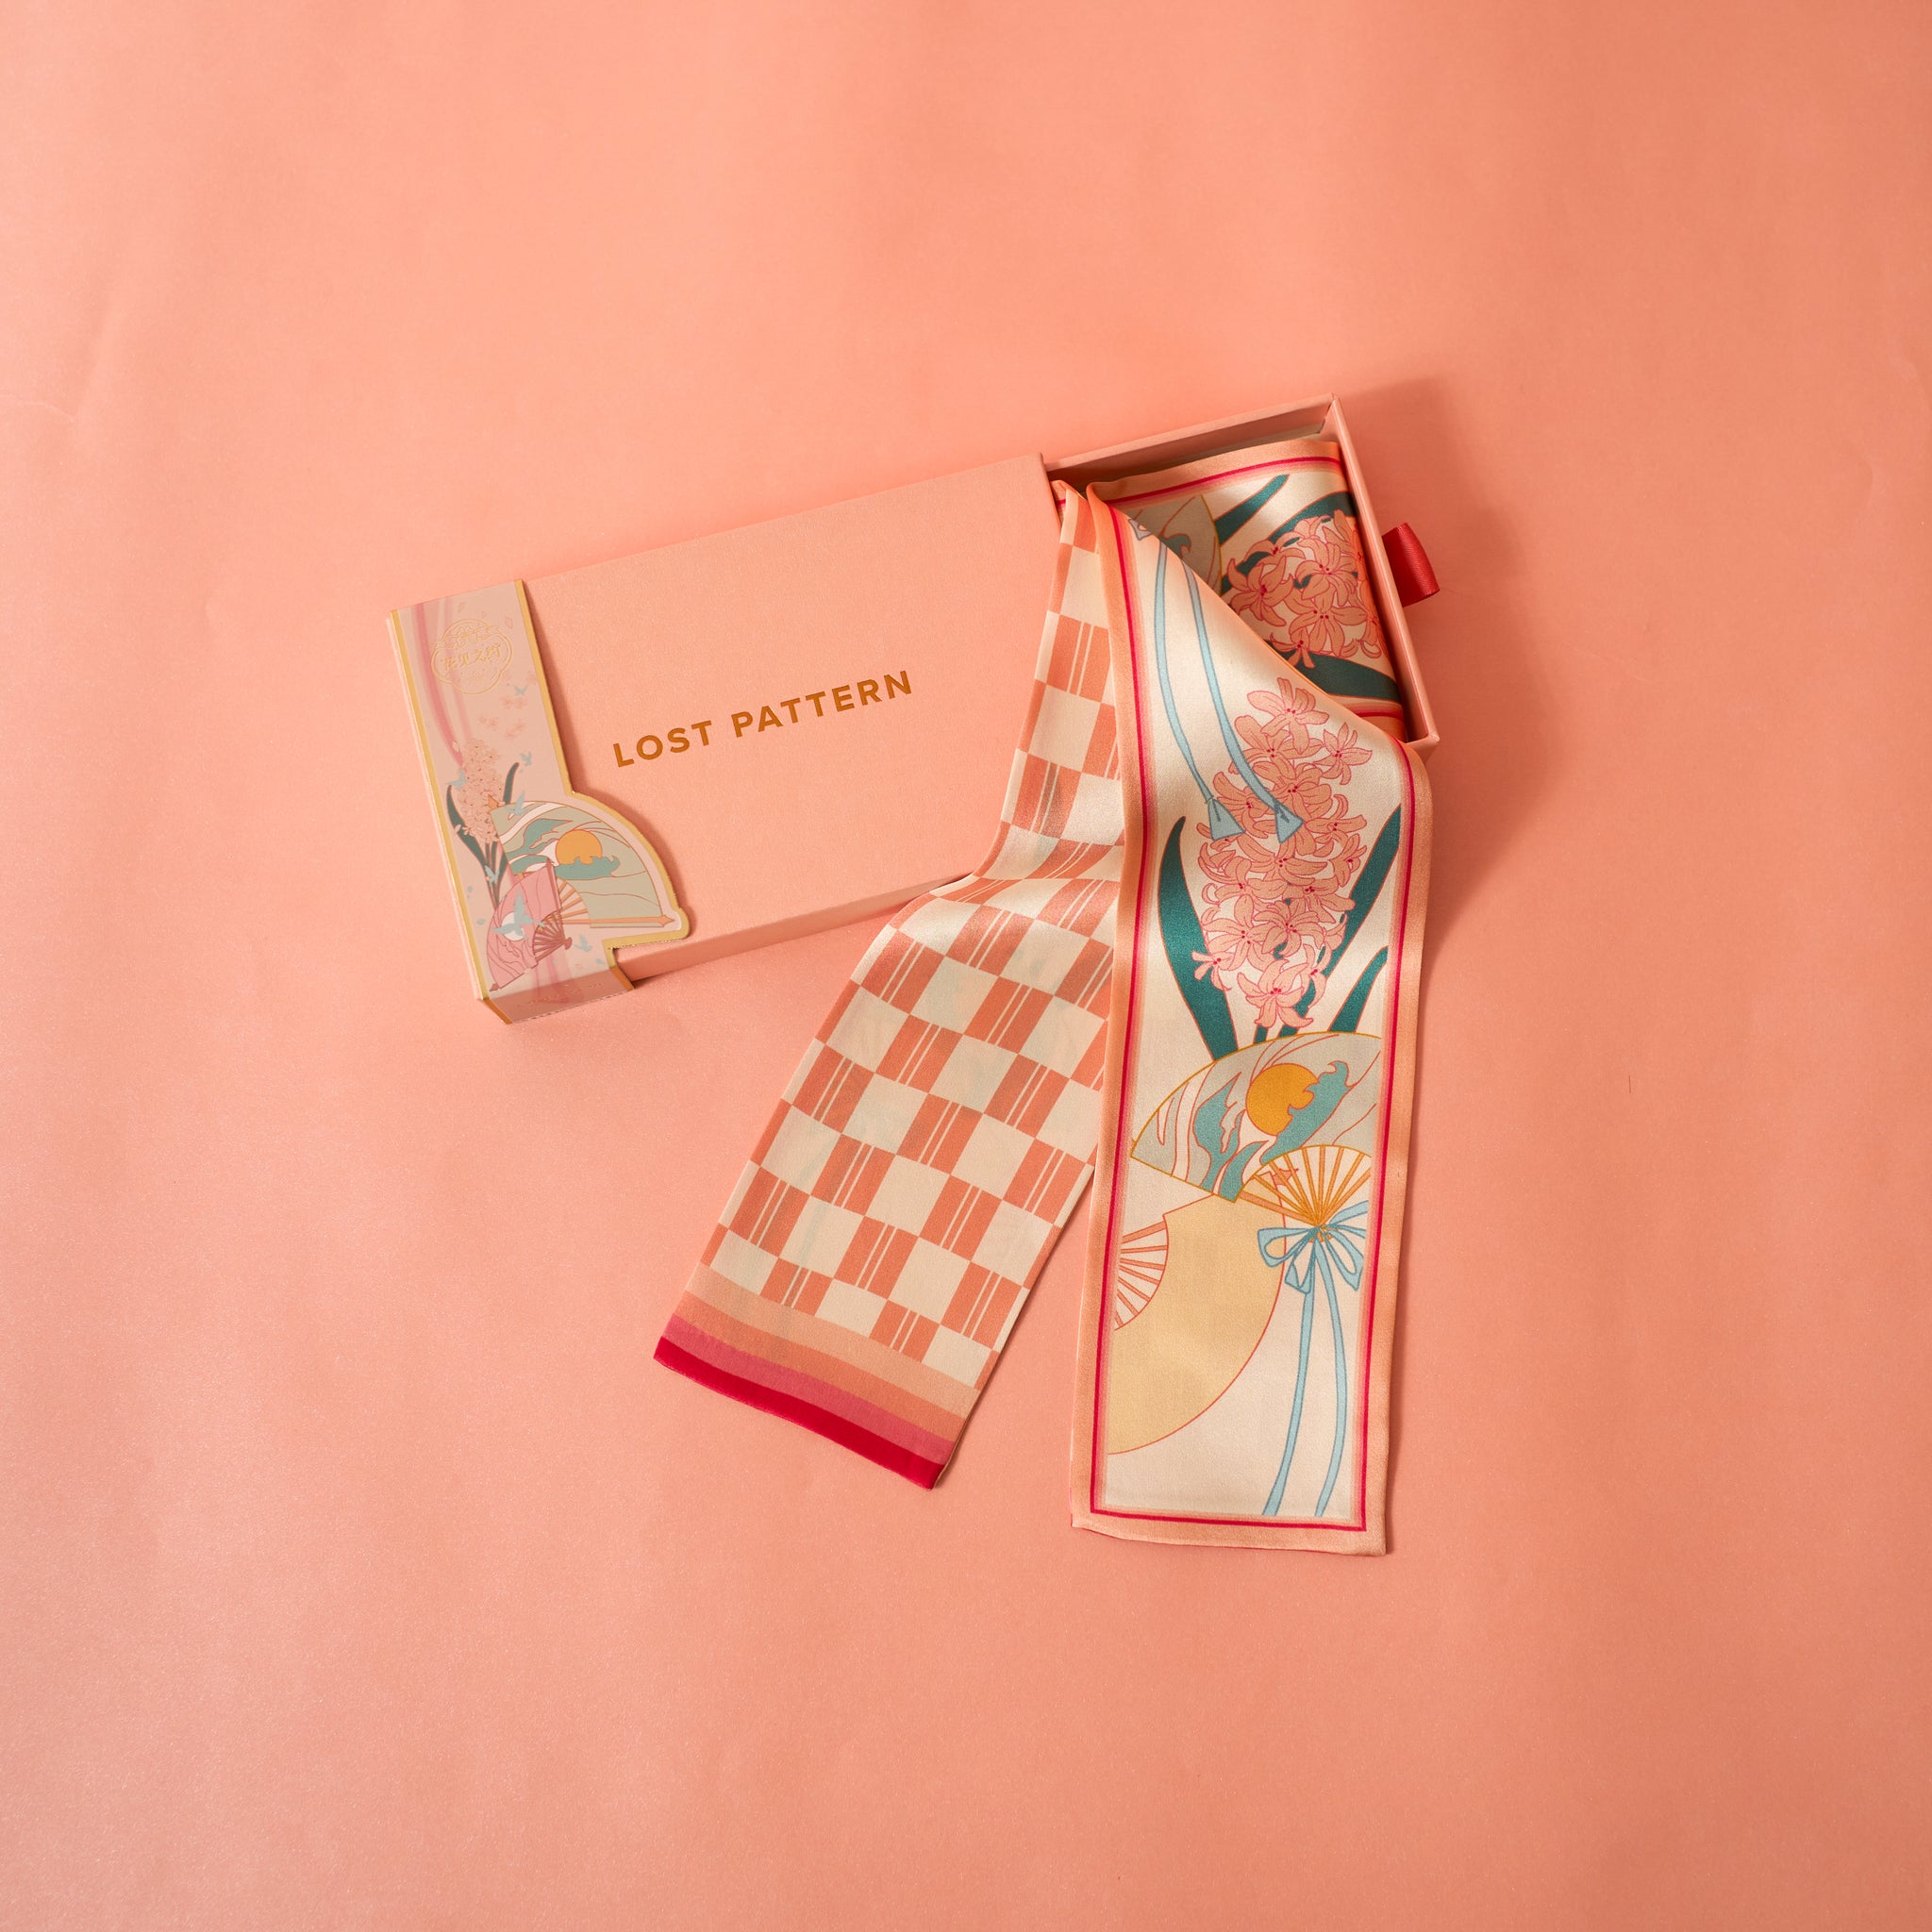 Accessories, Pink Twilly Lv Print Or Skinny Scarf